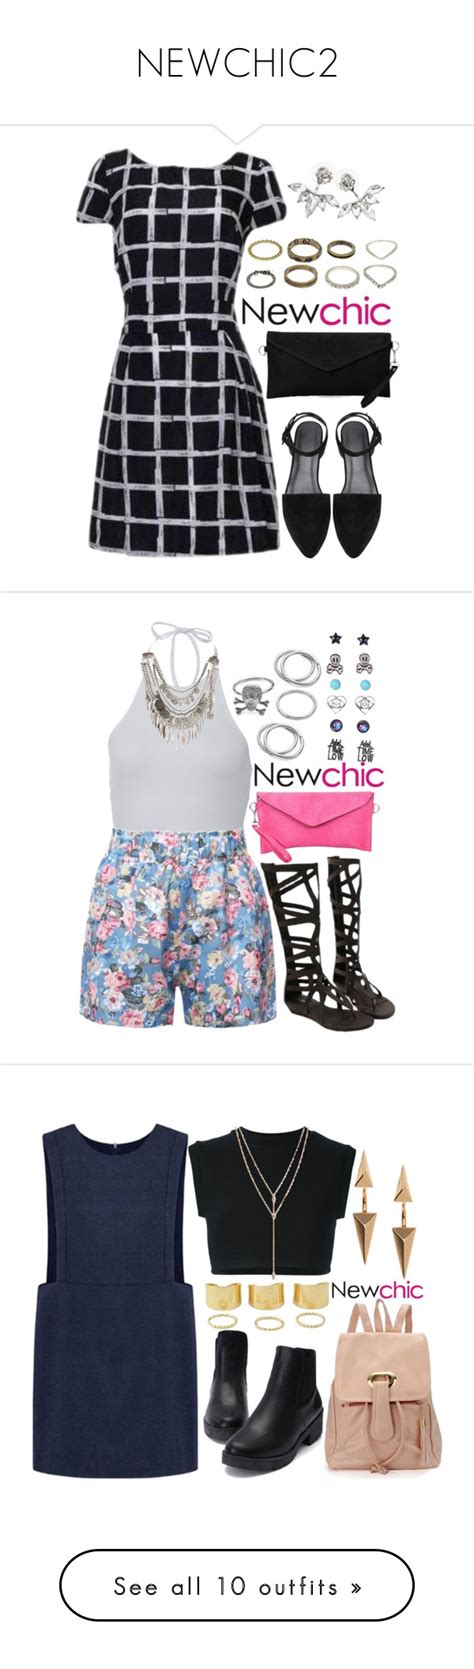 Newchic2 By Adc421 Liked On Polyvore Featuring Adidas Originals